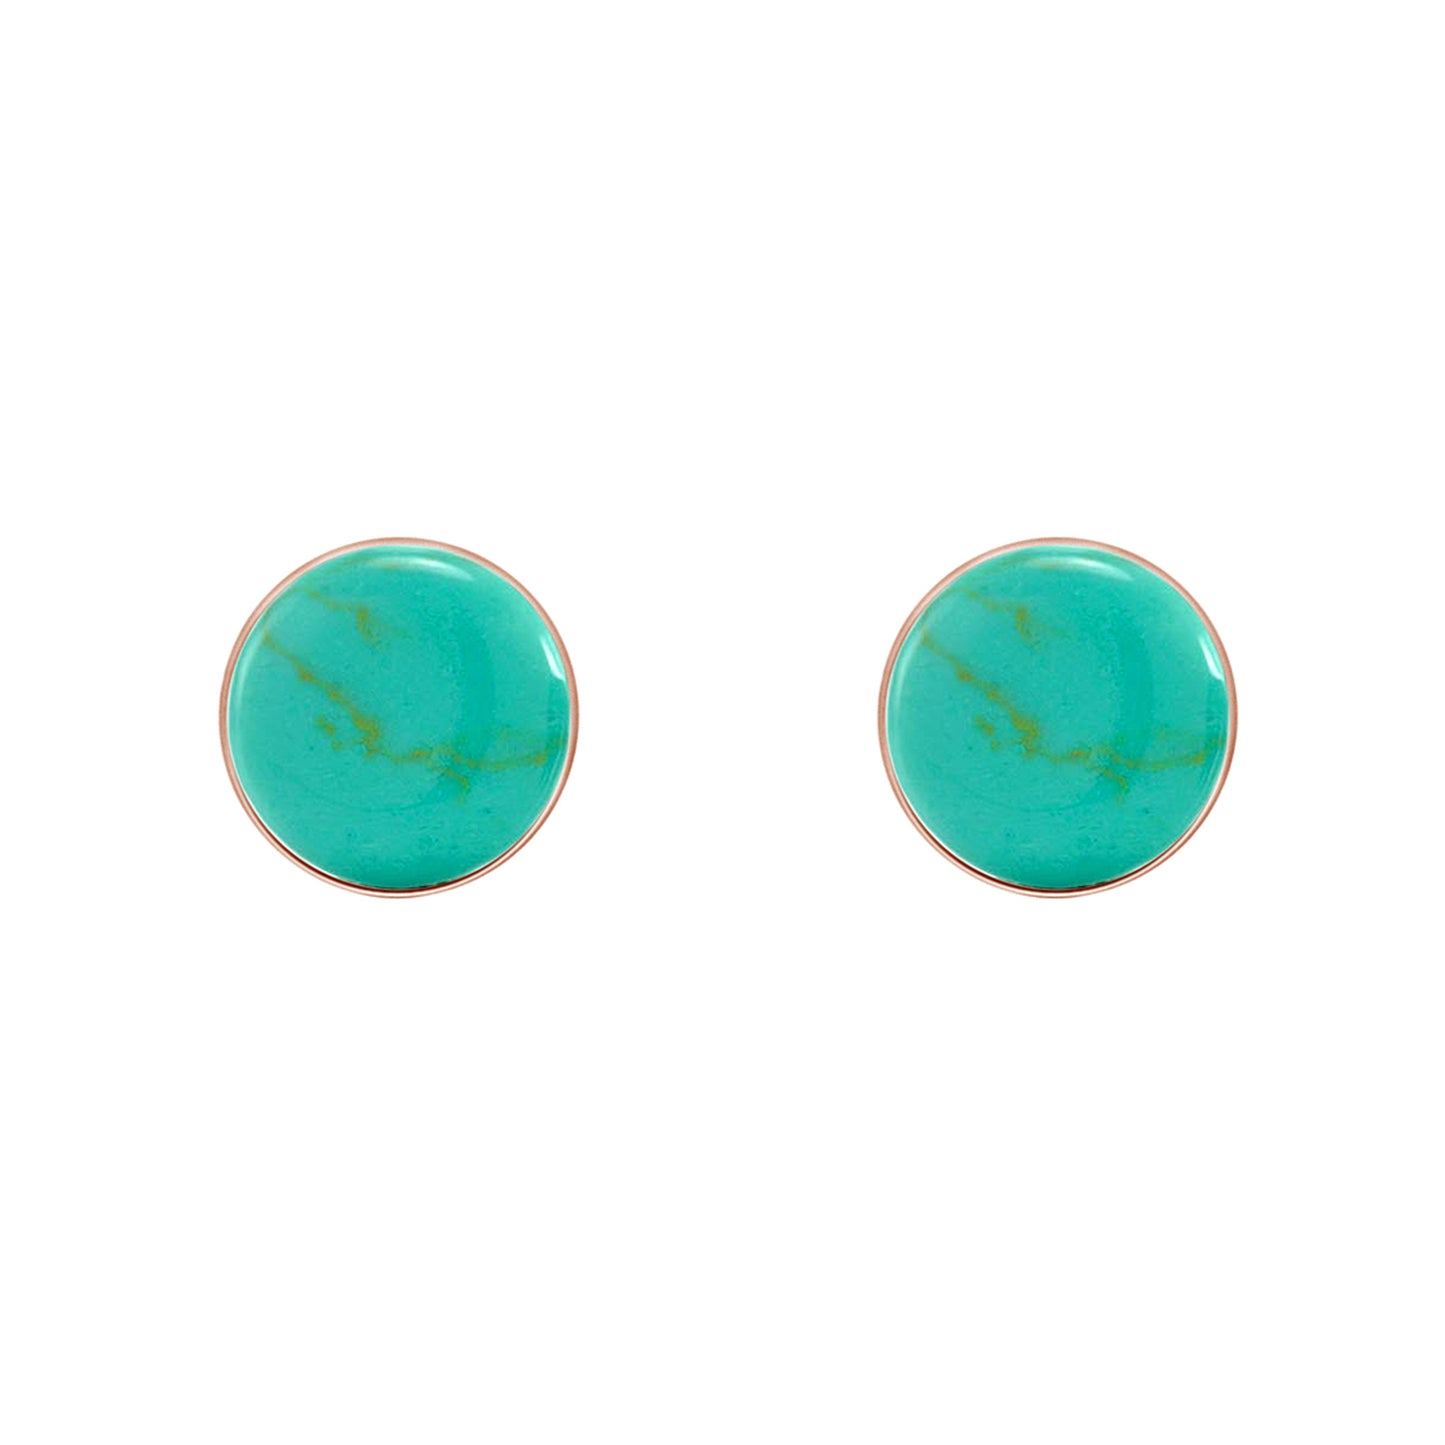 Round Turquoise Bezel Set Dome Button Stud Earrings For Women In 925 Sterling Silver